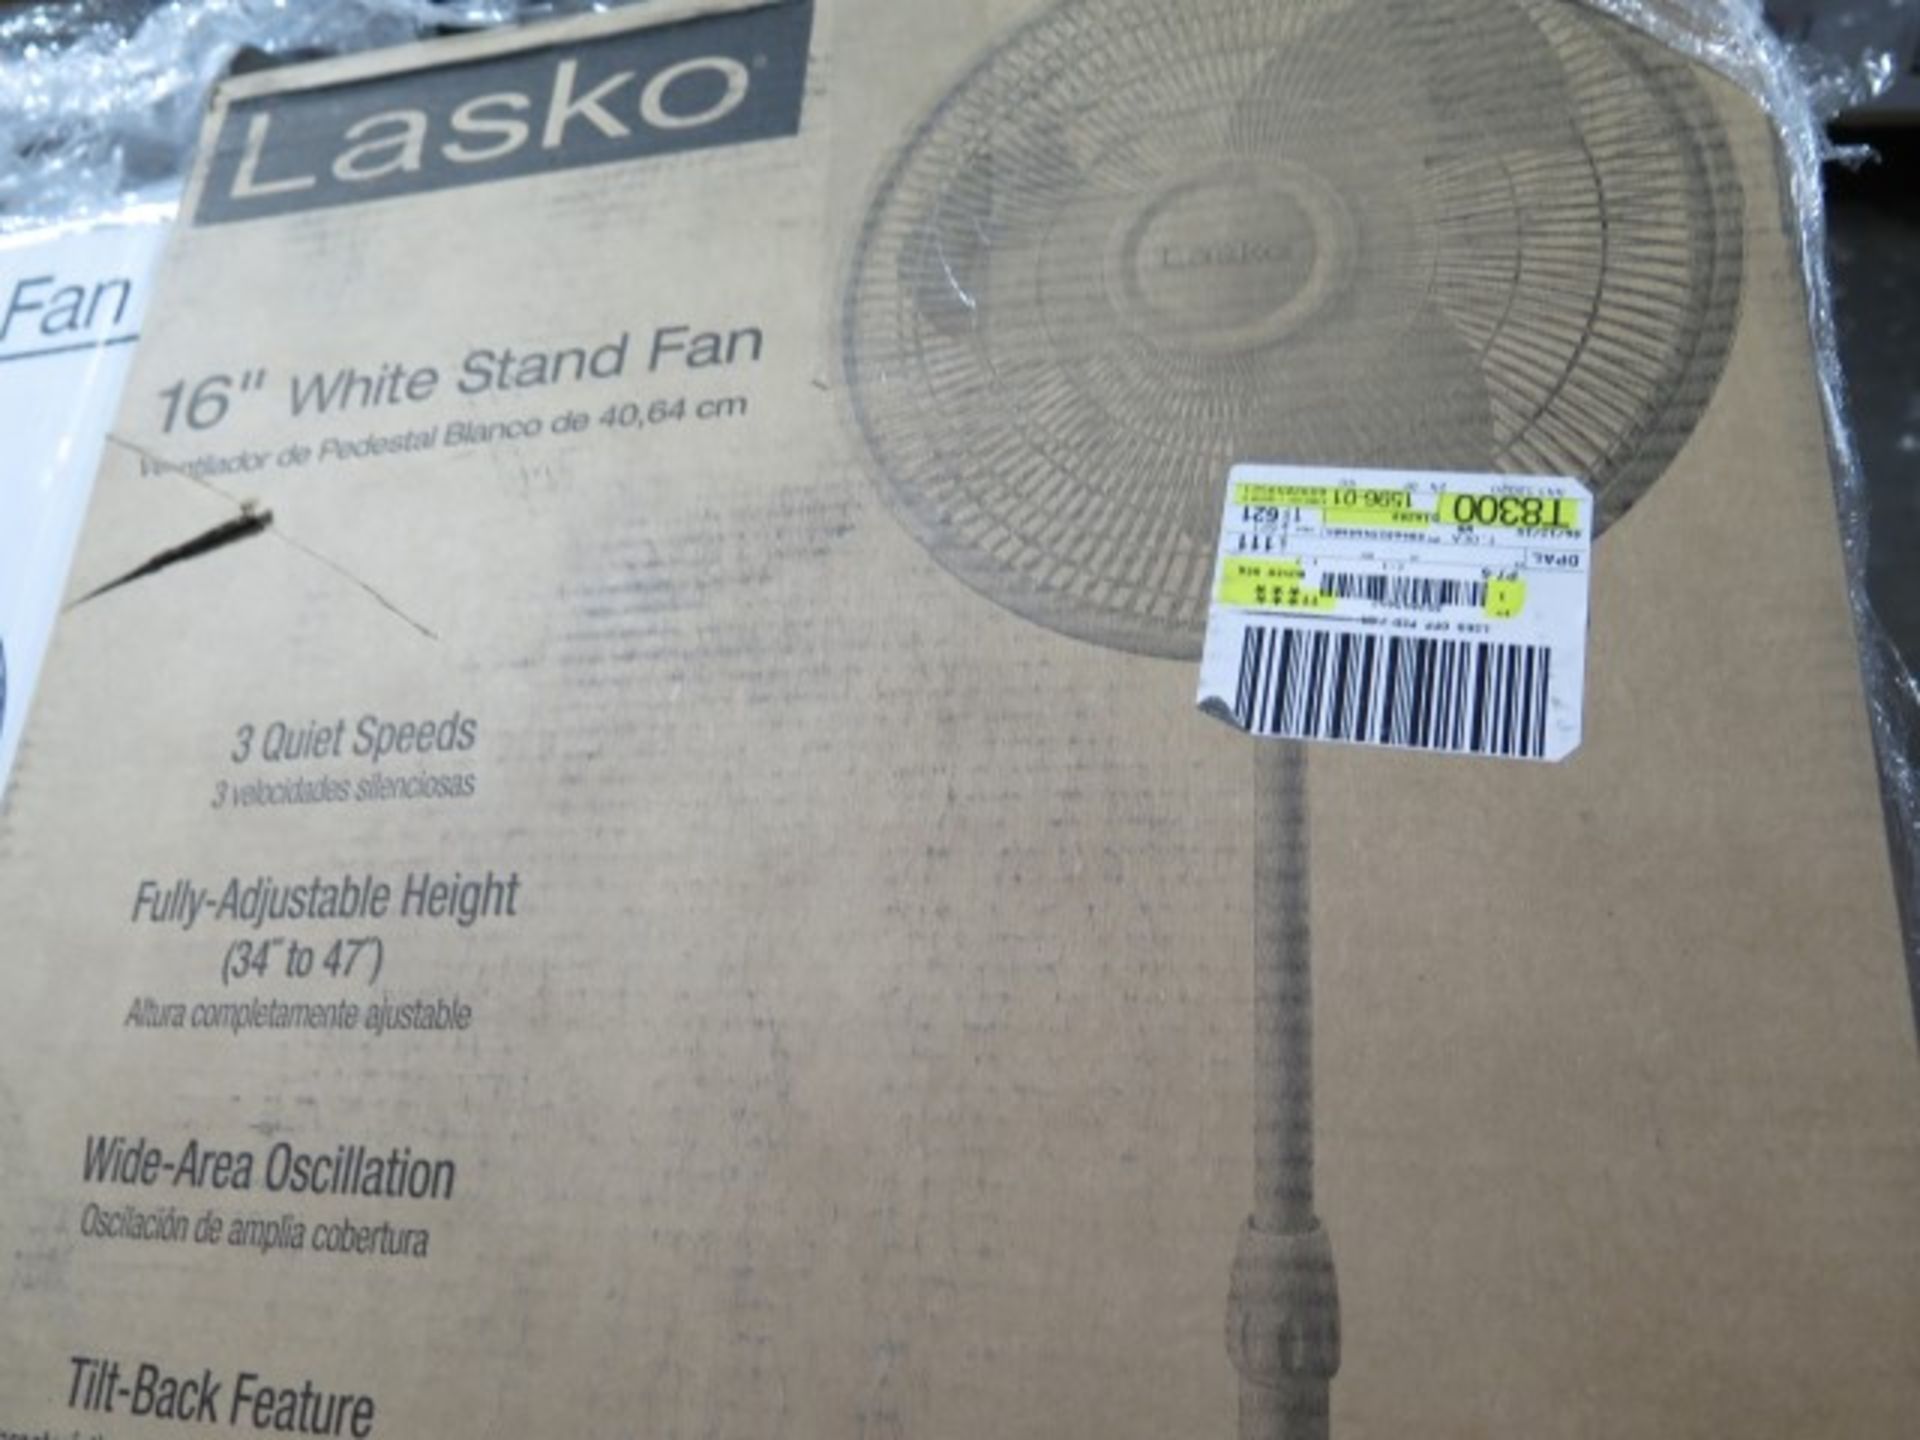 Lot of Fans, Lighting & Scales with $538 ESTIMATED retail value. Lot includesLasko 16" Pedestal - Image 4 of 6